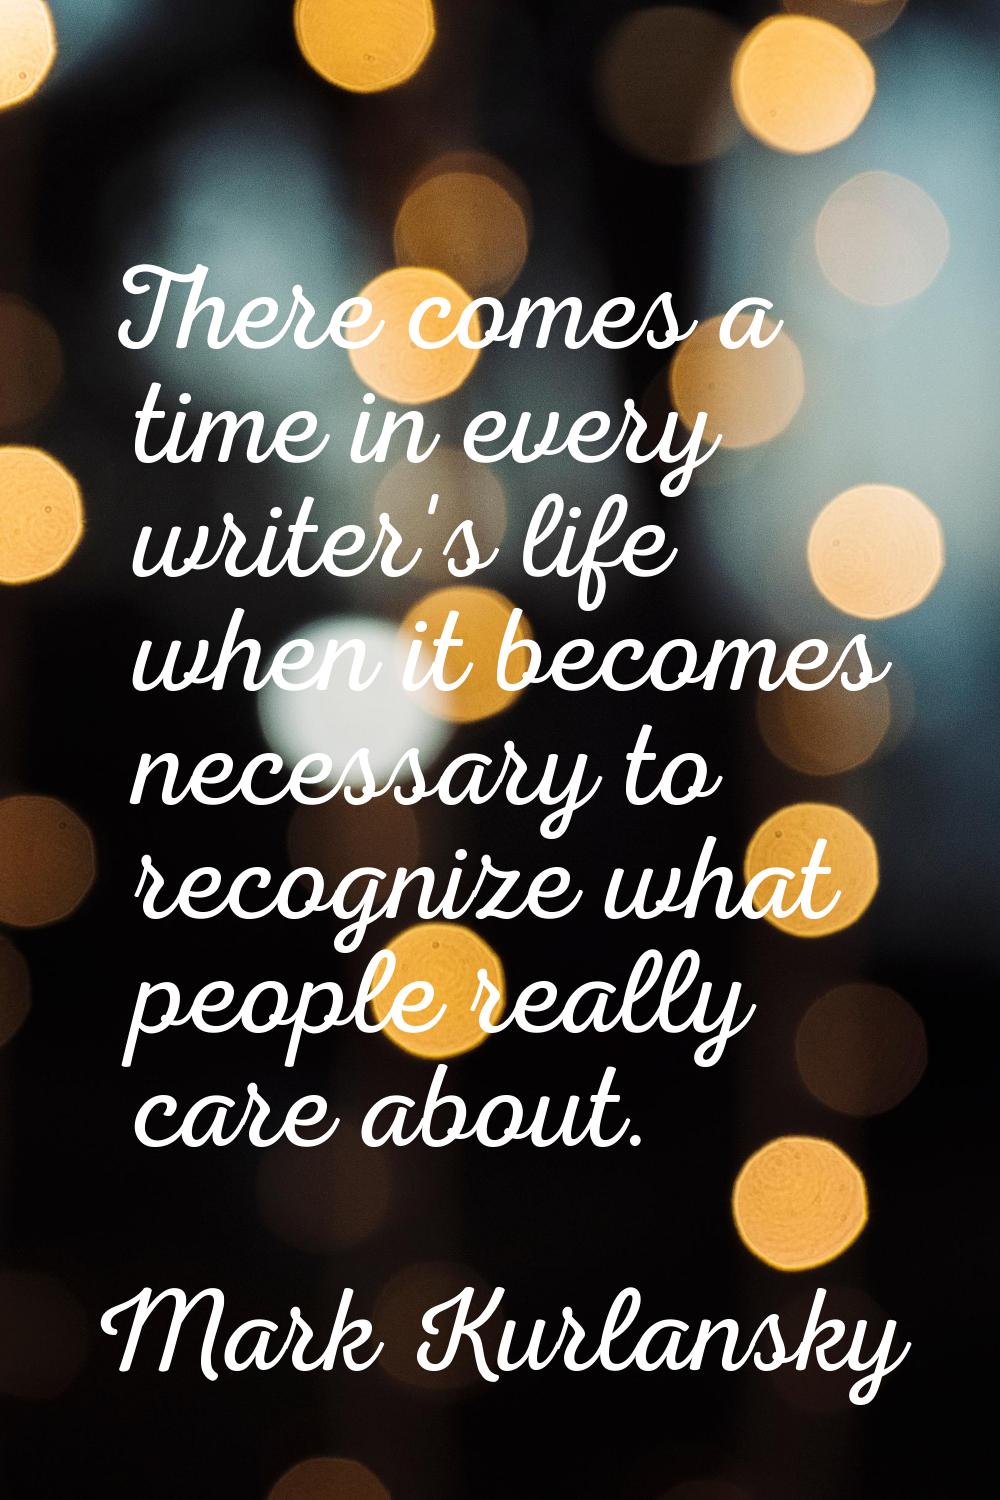 There comes a time in every writer's life when it becomes necessary to recognize what people really